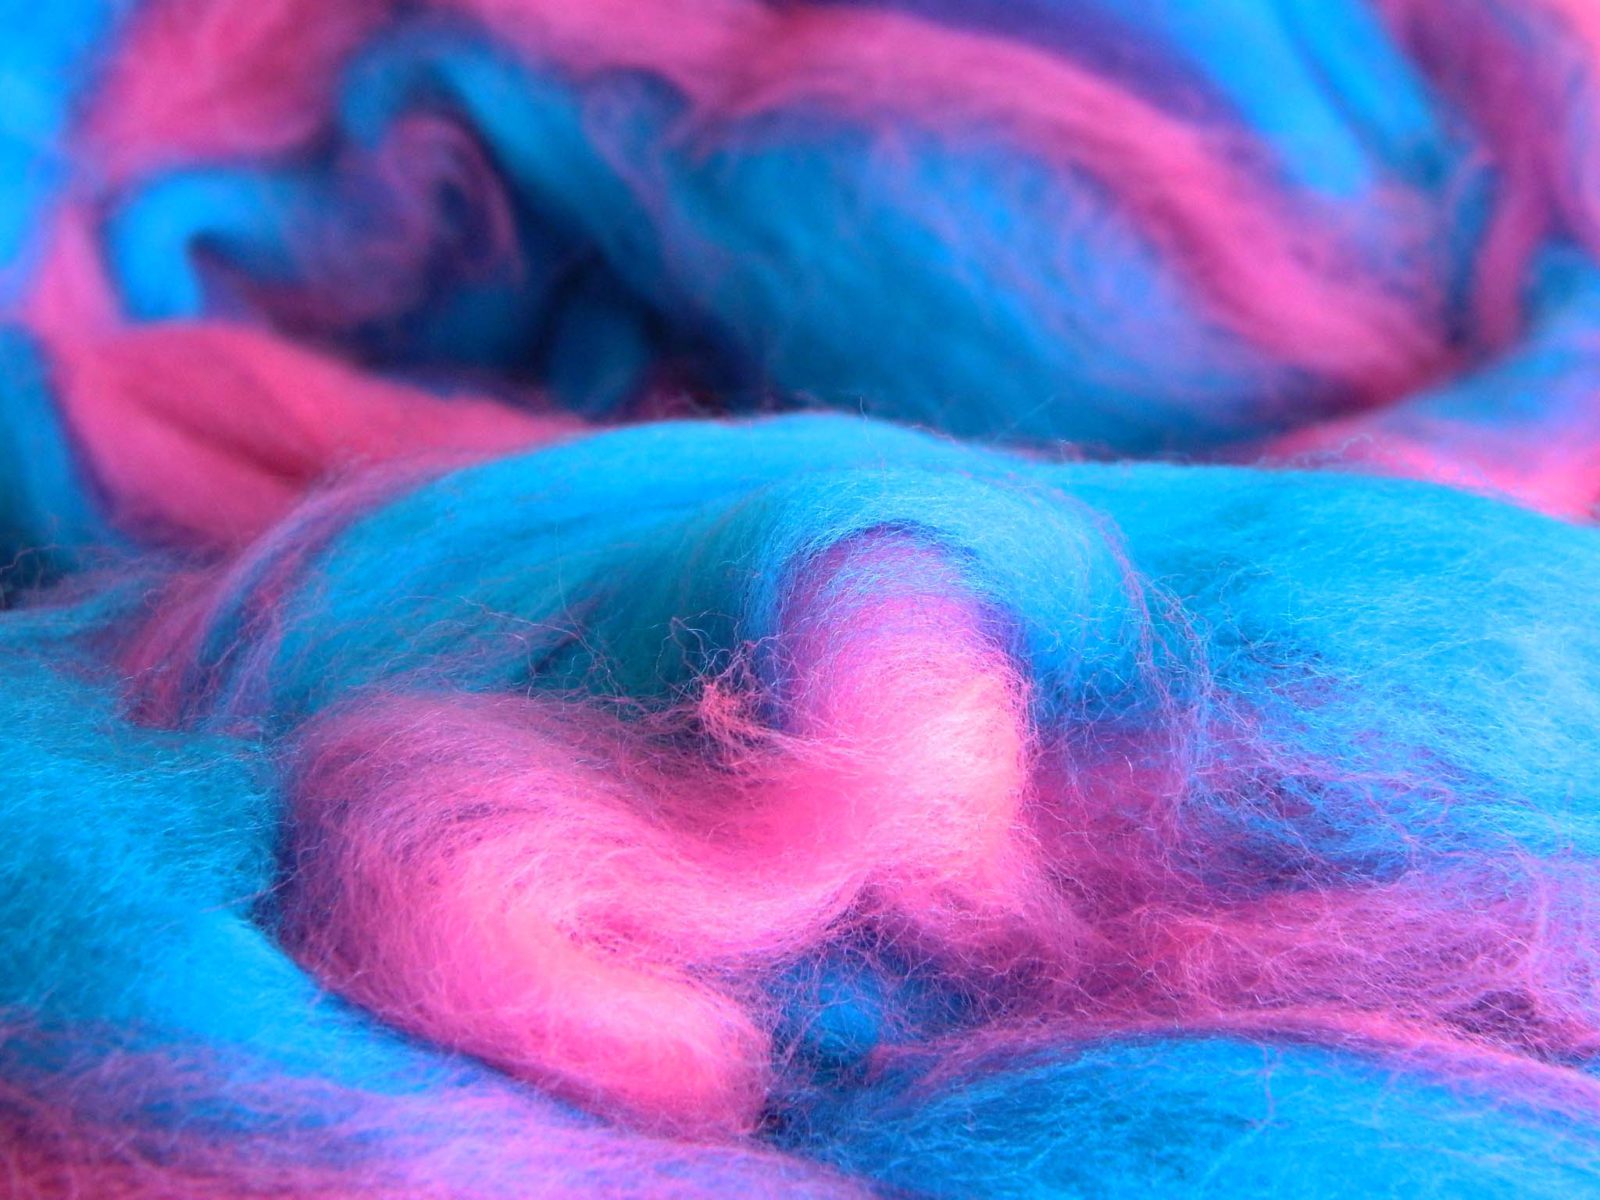 Large fluffy pile of blue and pink cotton candy